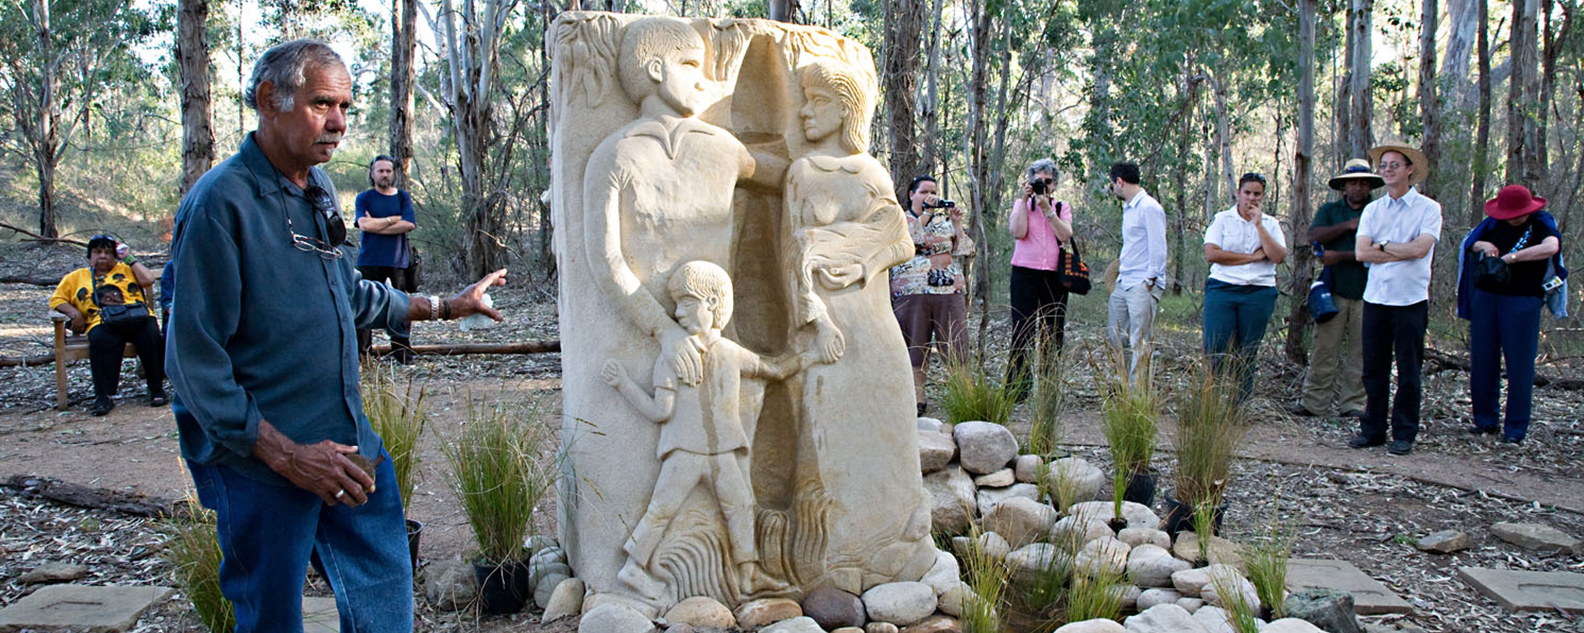 Stone sculpture of a mother, father and child, with people standing around it